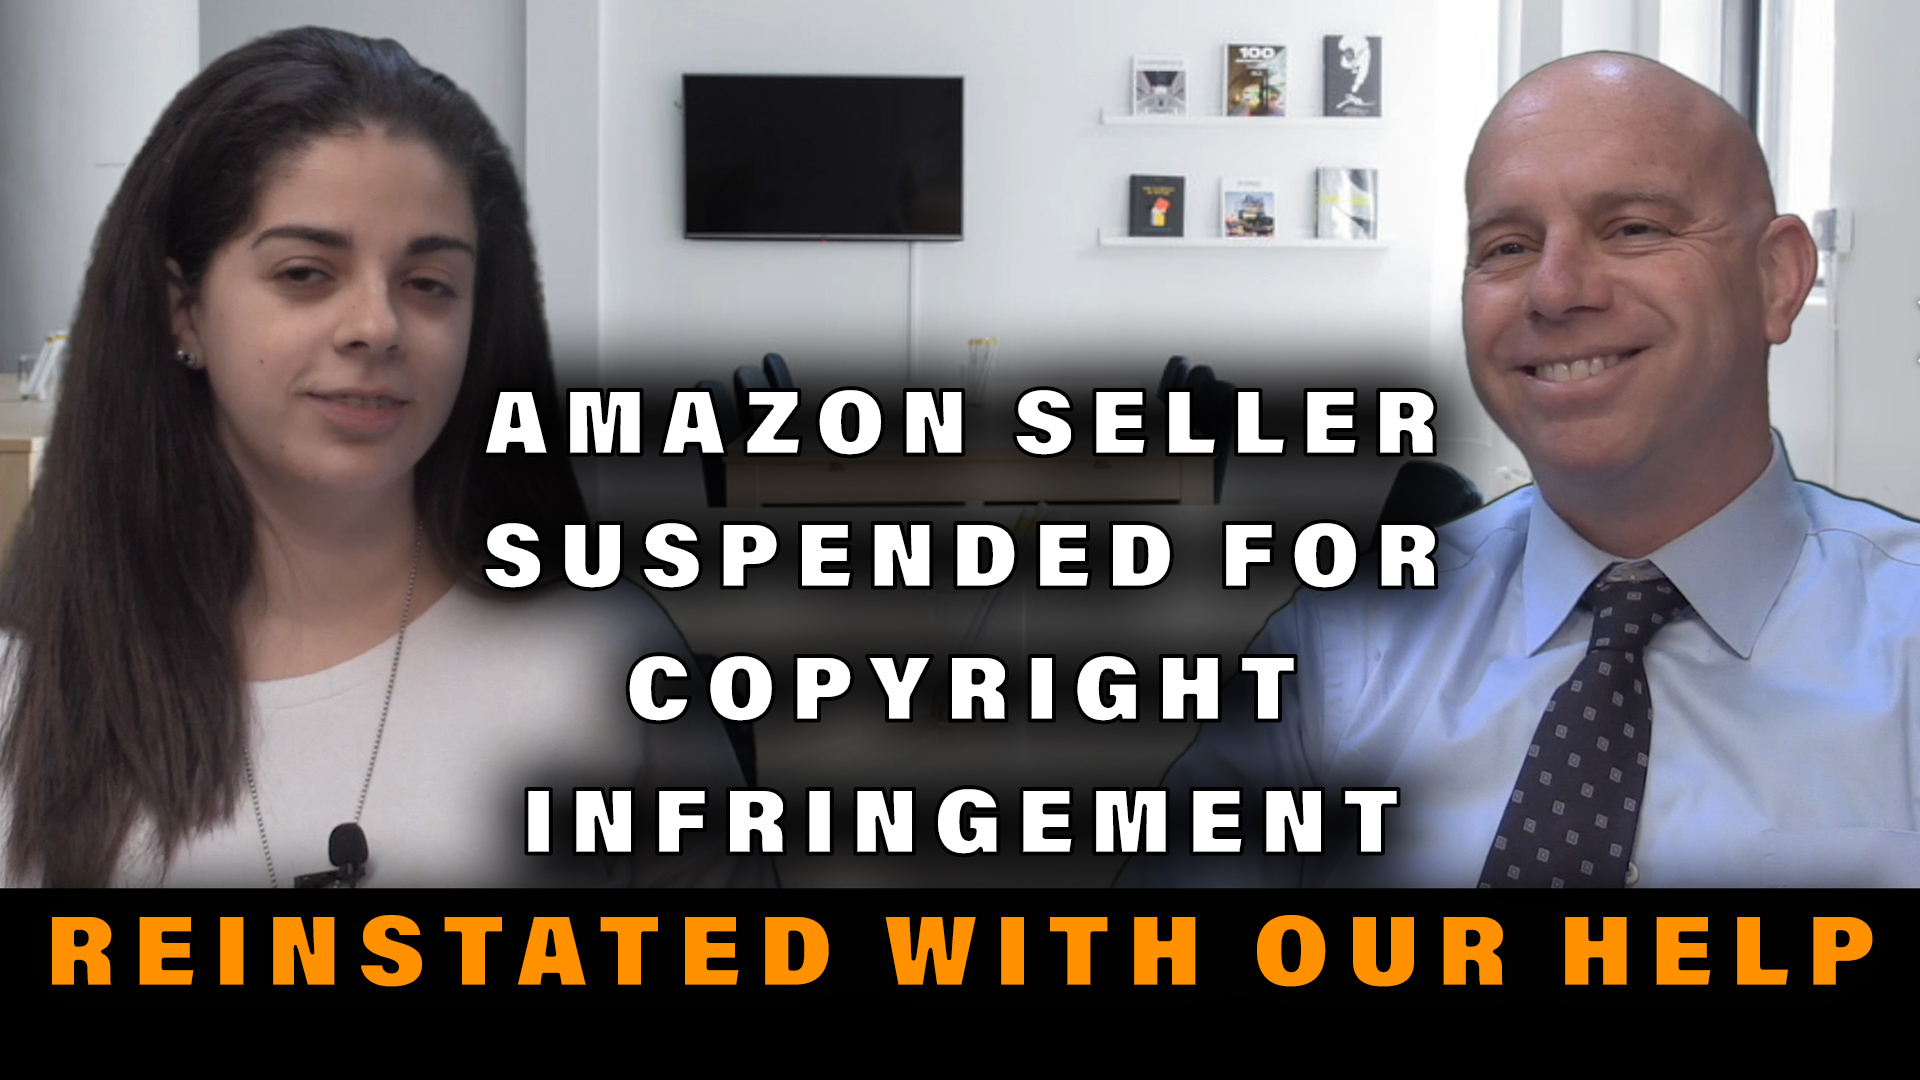 Amazon Seller Suspended for Copyright Infringement – Now Reinstated